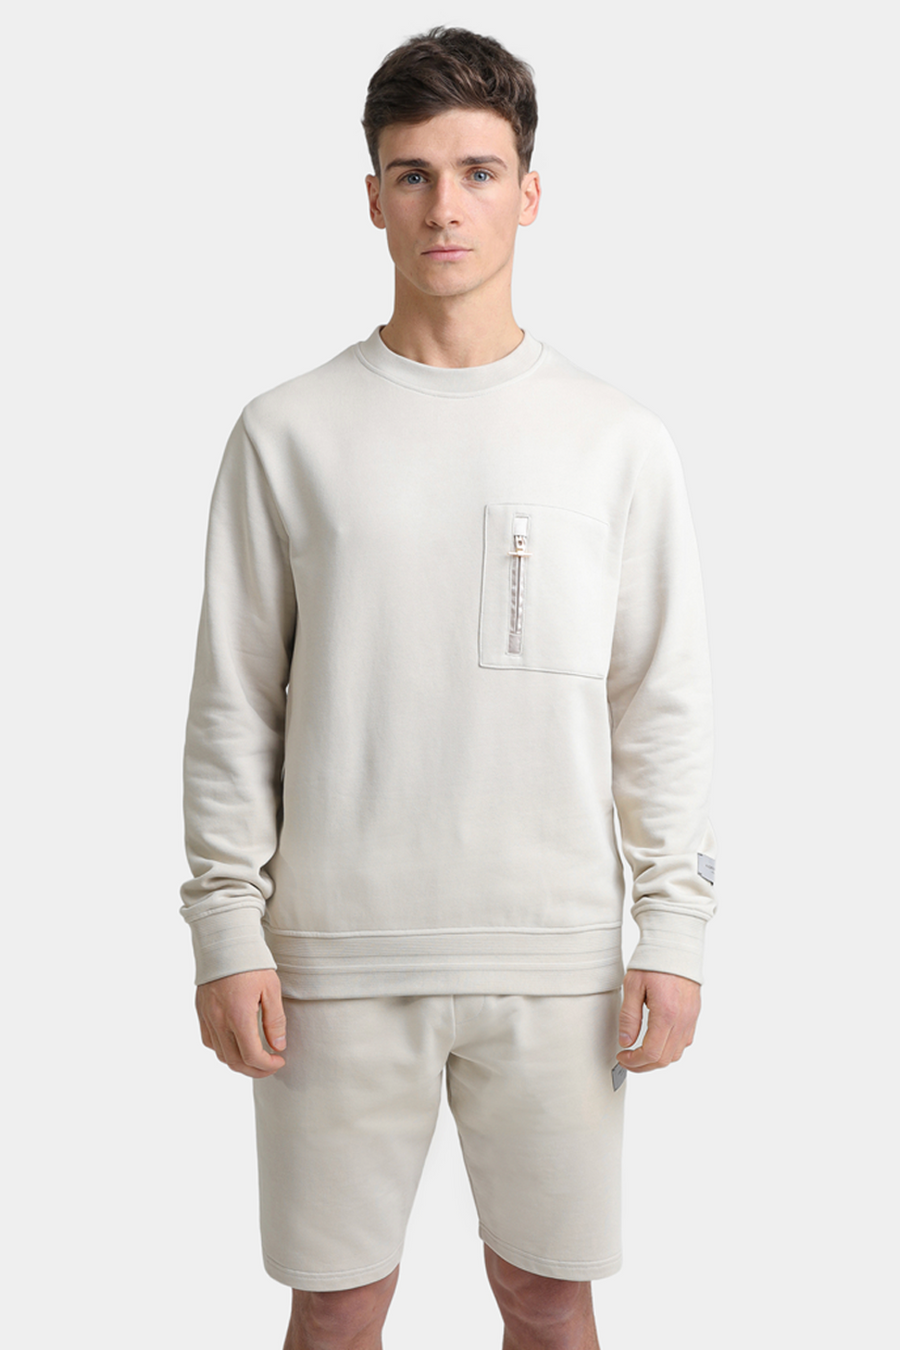 Buy the Android Homme Zip Pocket Crew Sweatshirt in Sand at Intro. Spend £100 for free UK delivery. Official stockists. We ship worldwide.